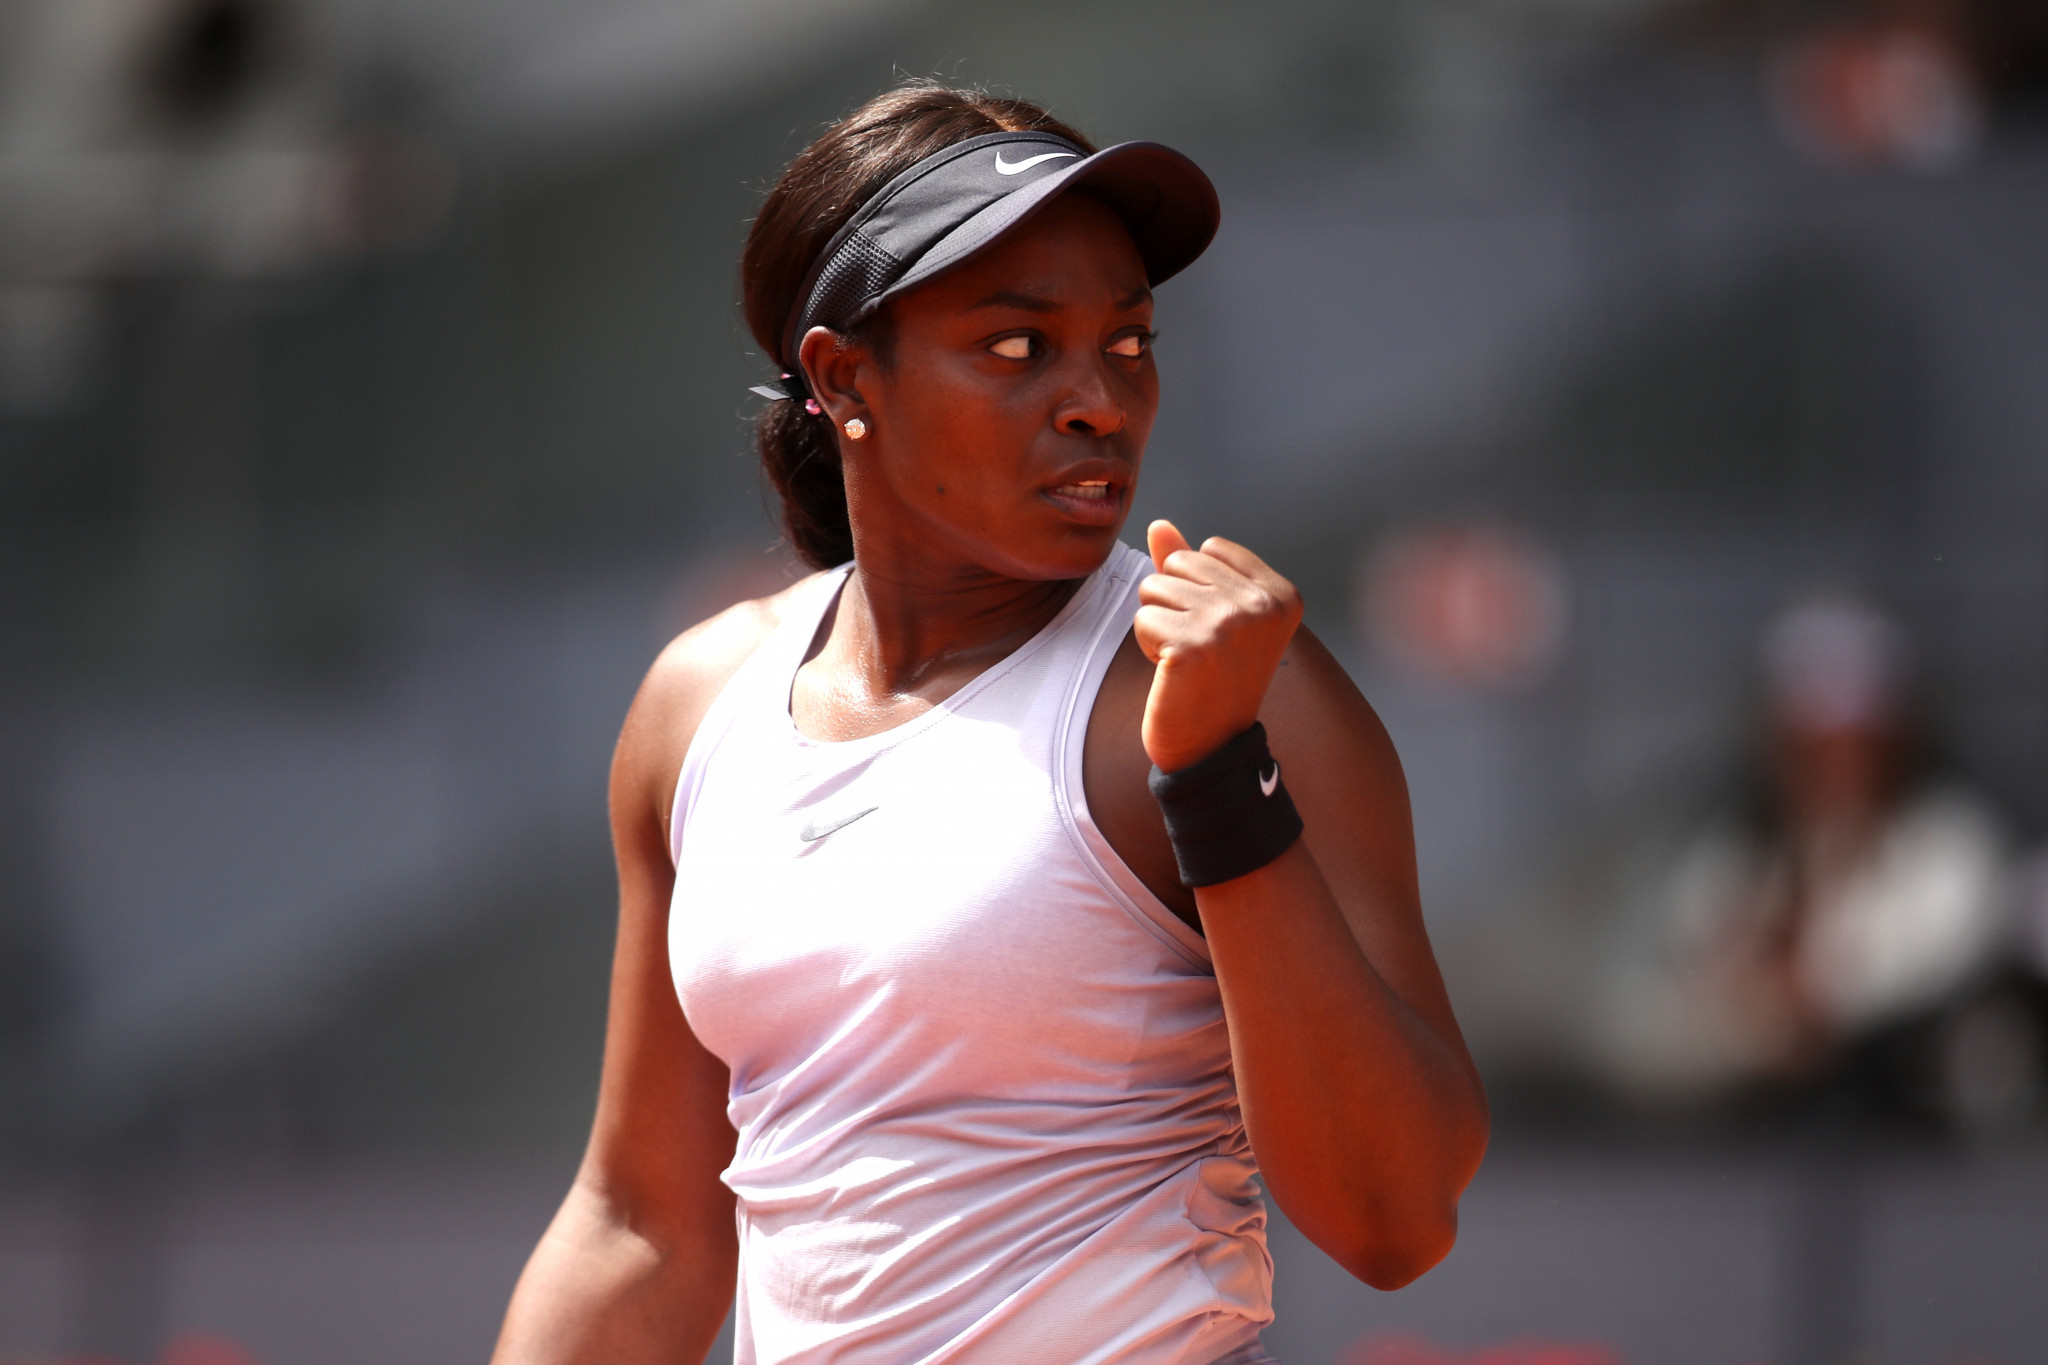 The United States’ Sloane Stephens is through to the last 16 at the Madrid Open after registering a fourth consecutive victory over former world number one Victoria Azarenka ©Getty Images